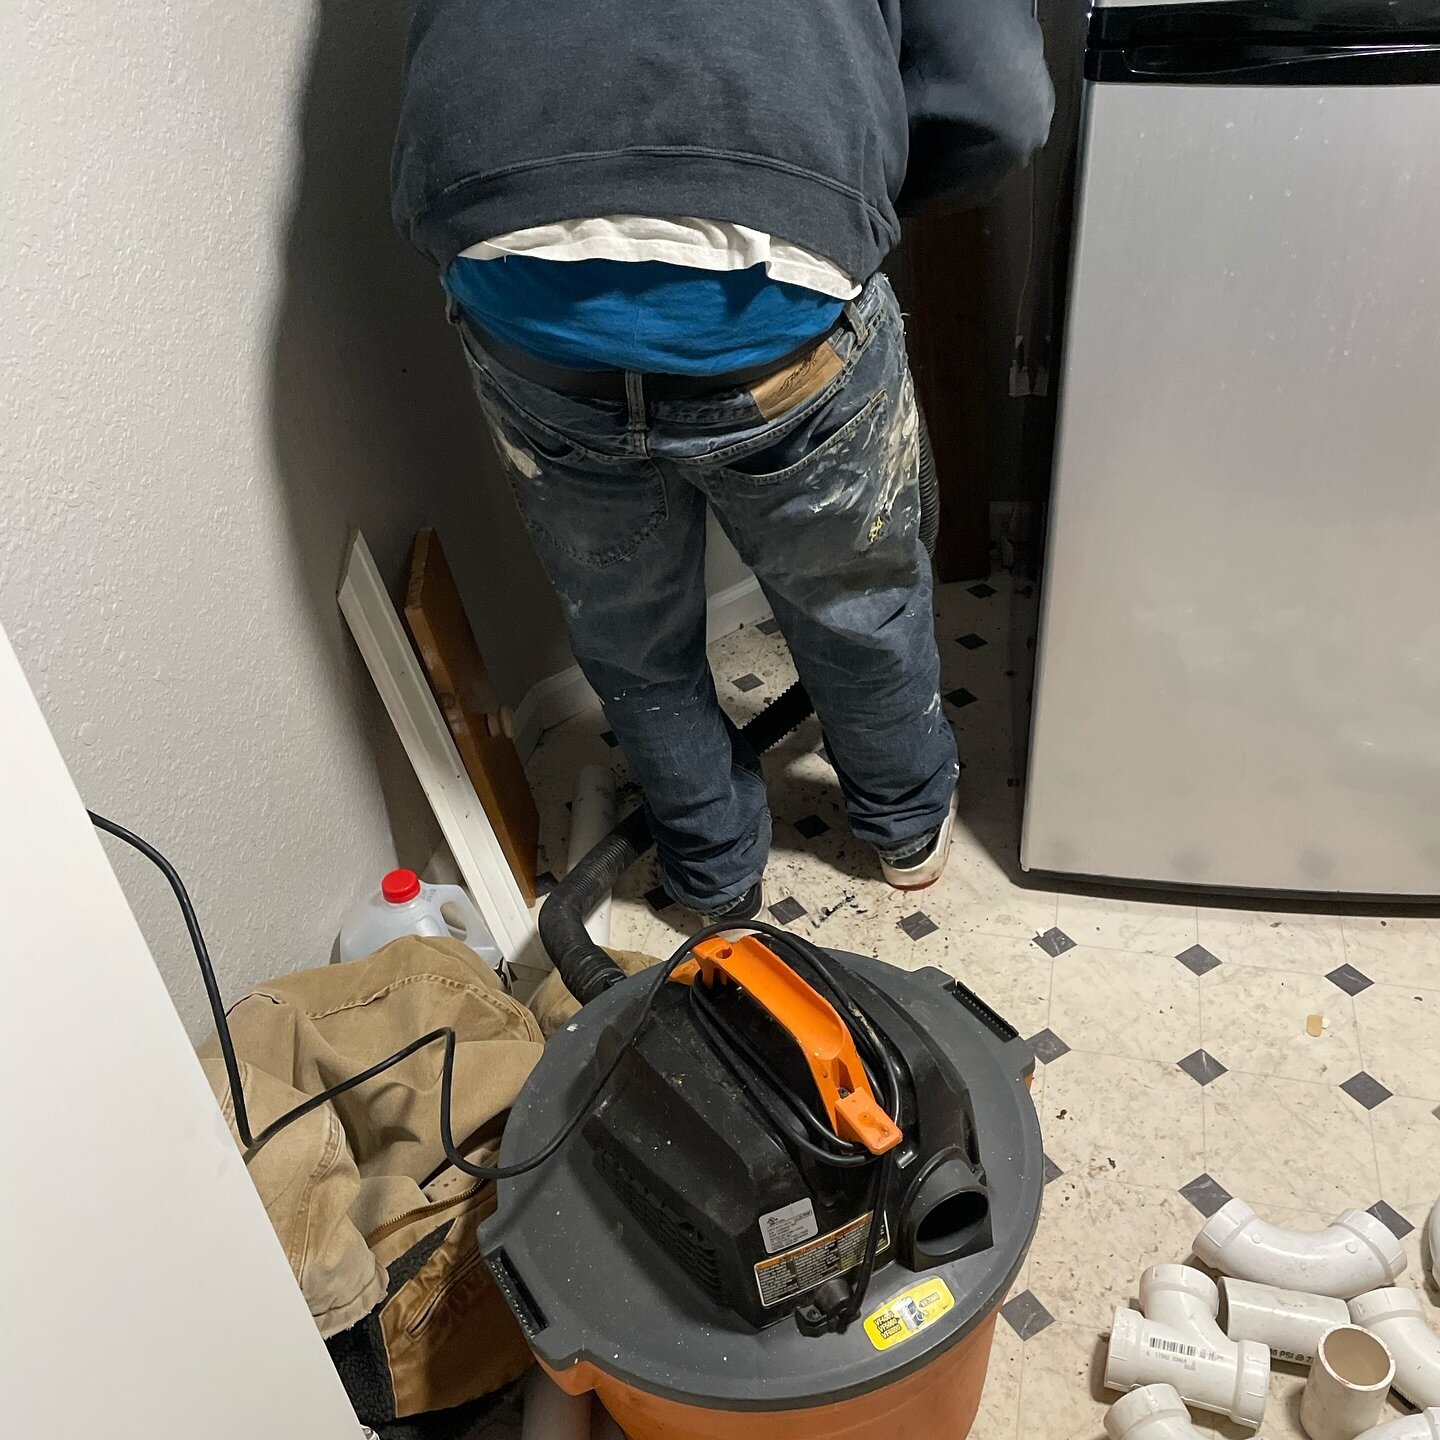 Bending over backward for the job!

No plumbing task is too challenging for our dedicated team. 

Choose Drains Great for top-quality service.

#drainsgreat #plumbingsolutions #customersatisfaction 

Contact us today for all your plumbing needs!